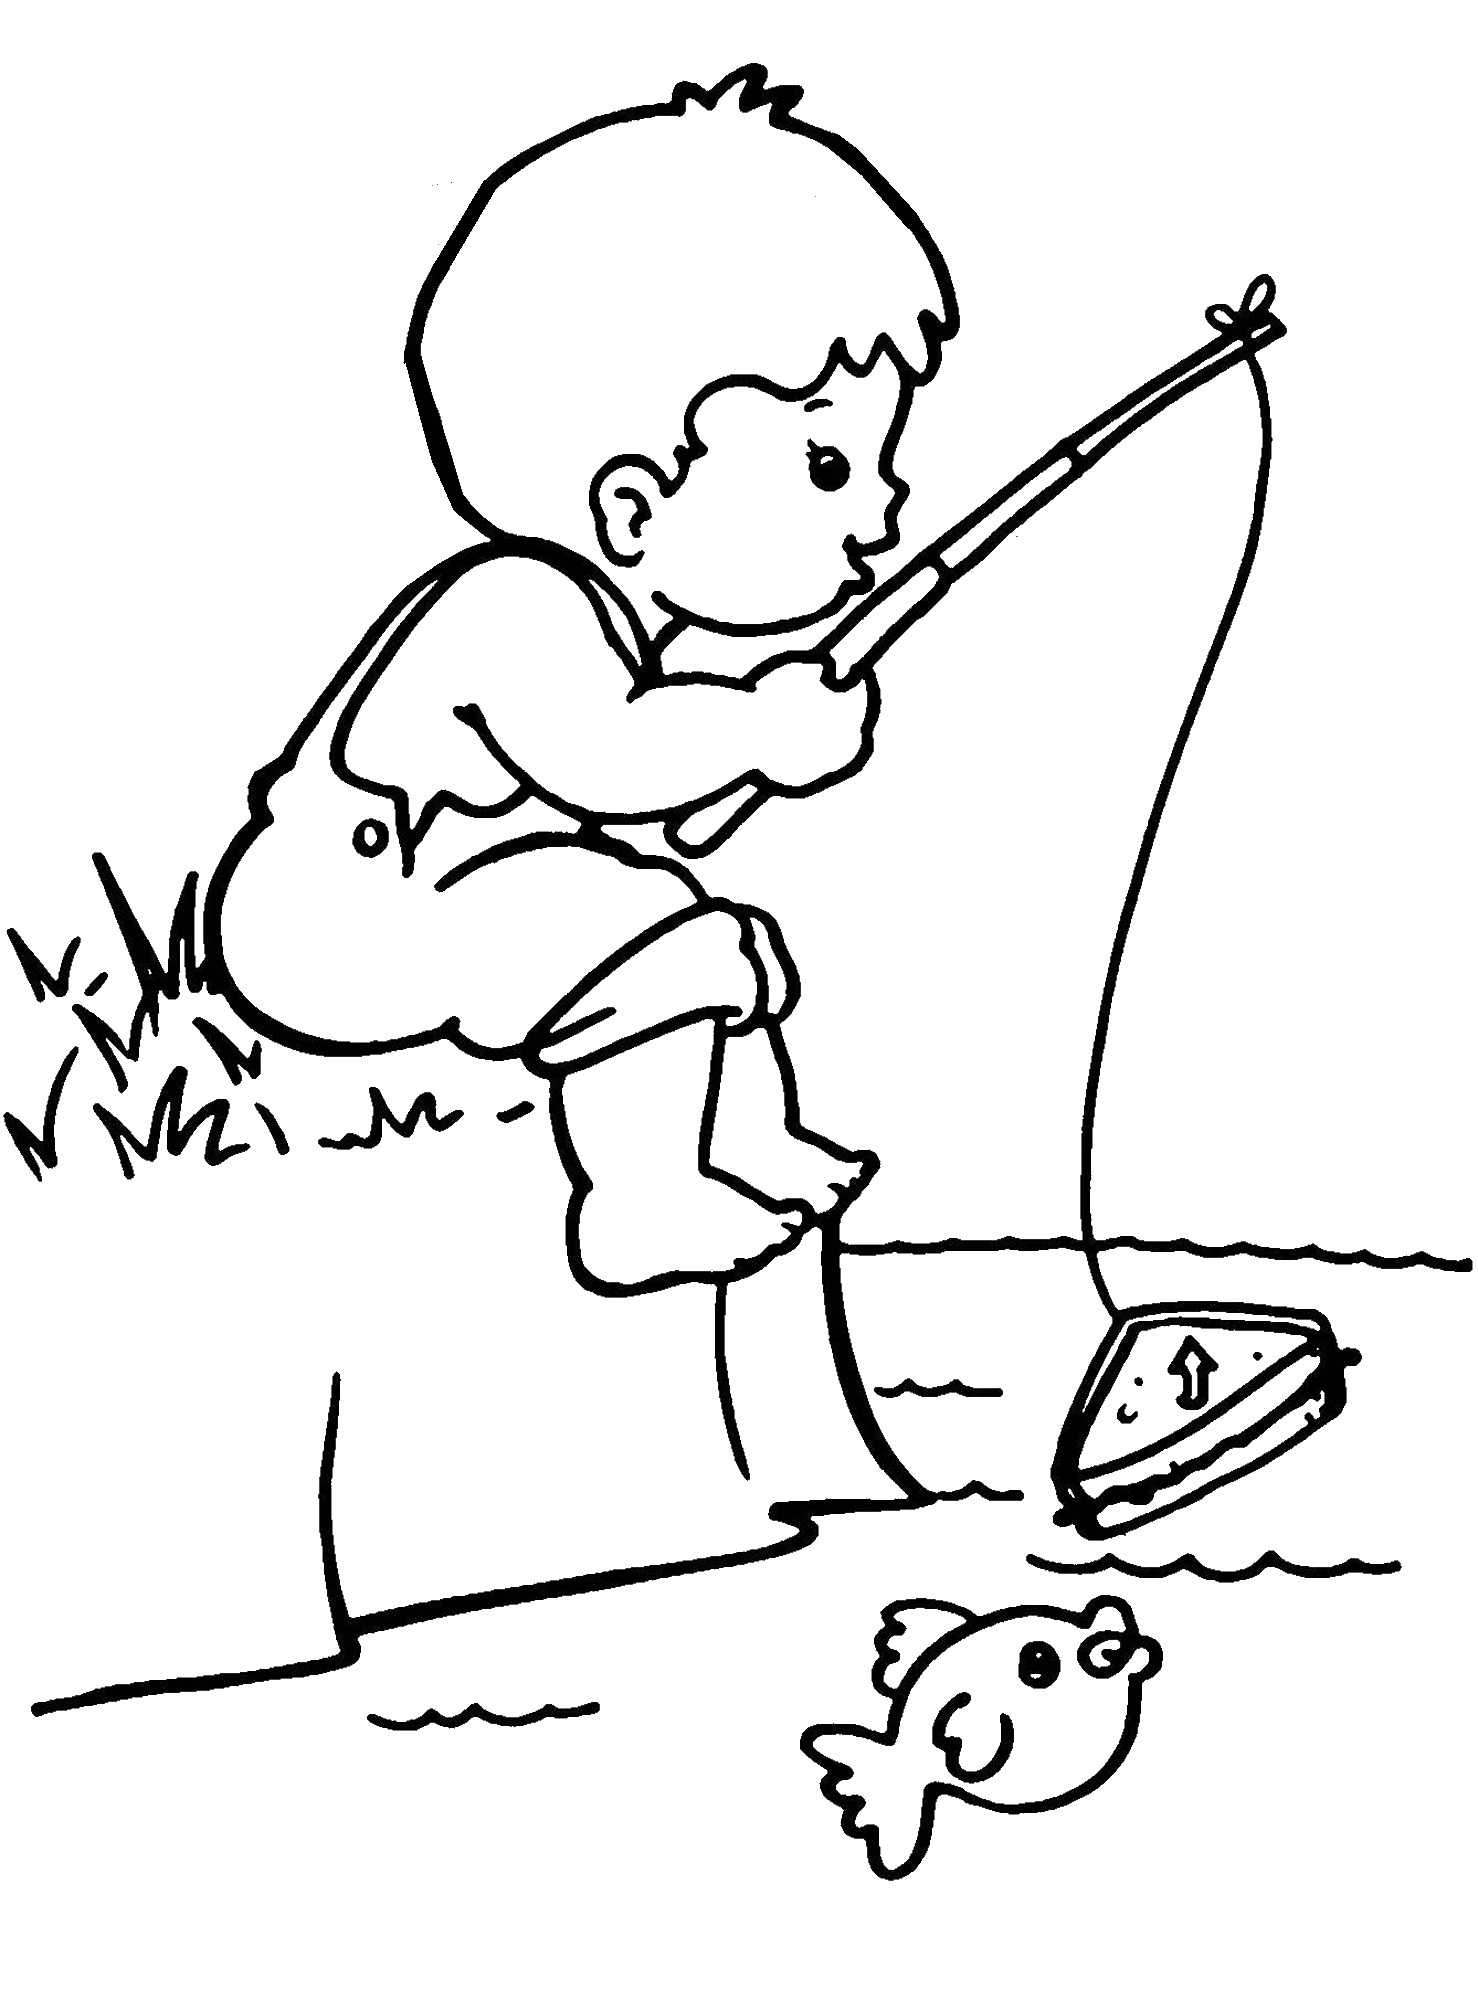 Cartoon Coloring Pages For Boys Coloring boys sheets printable pages comments kids